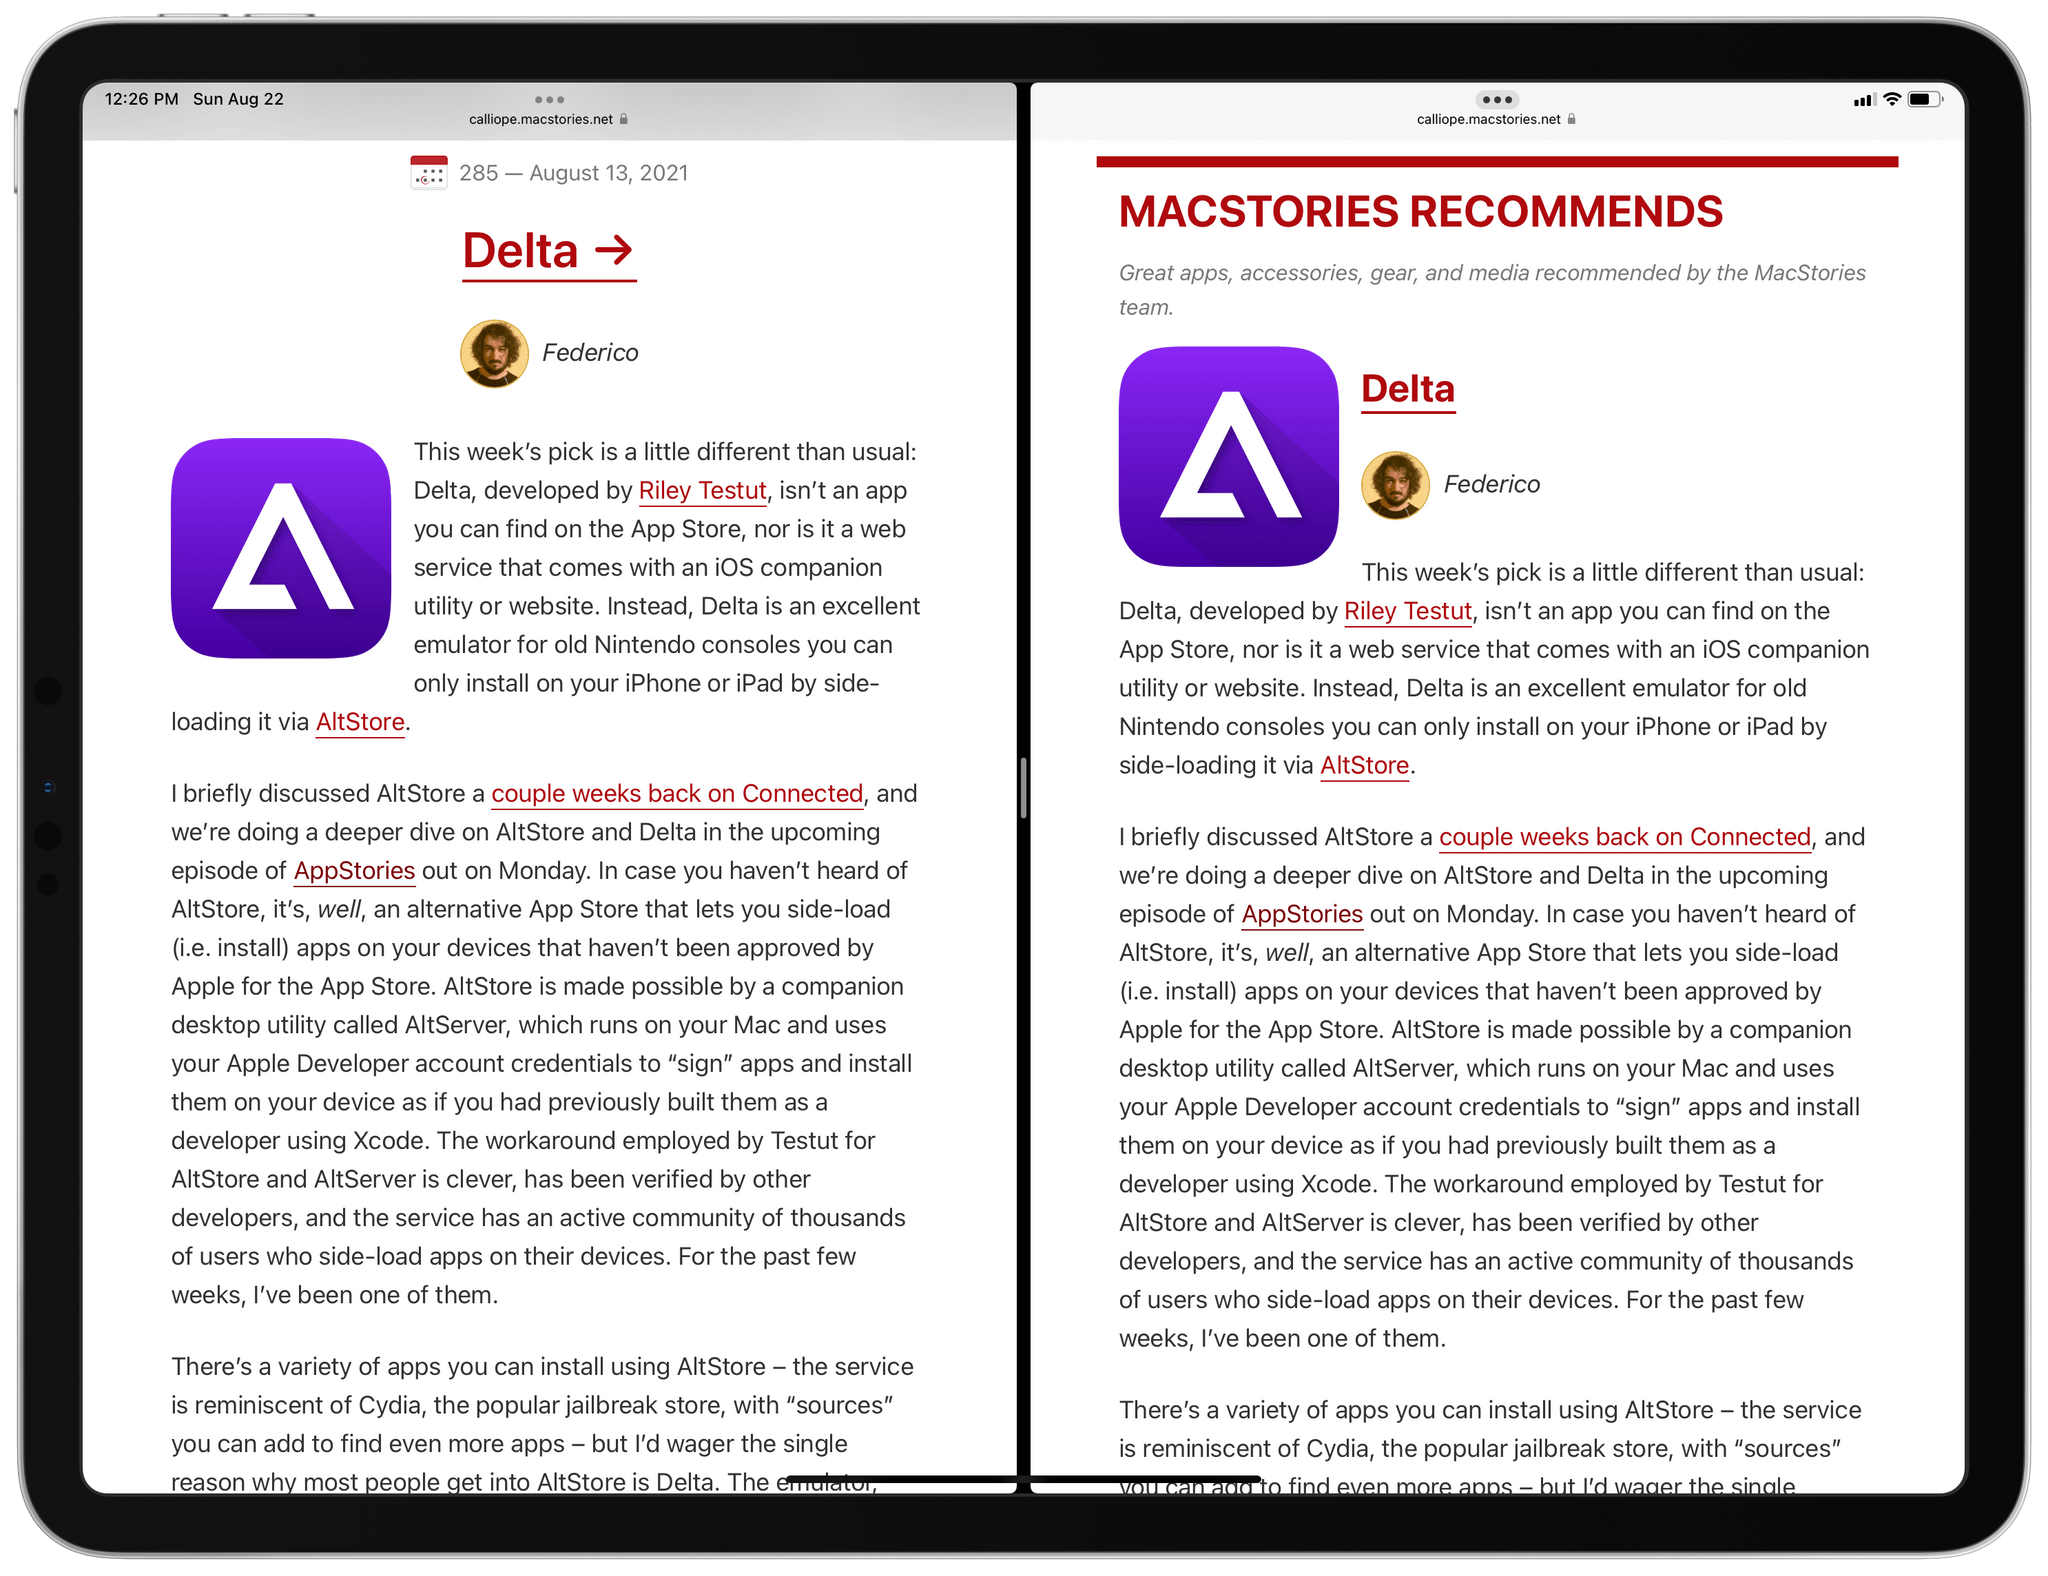 With the new Club MacStories website powered by Calliope, a section of a newsletter (right) can also be opened and linked as a standalone article (left).